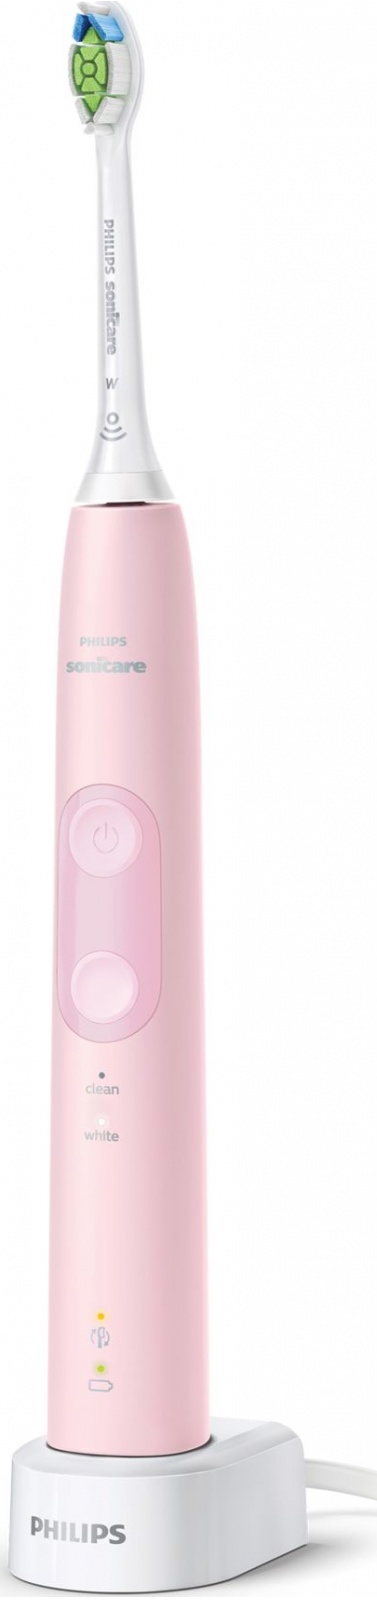 Philips Sonicare ProtectiveClean White HX6836/24 růžový